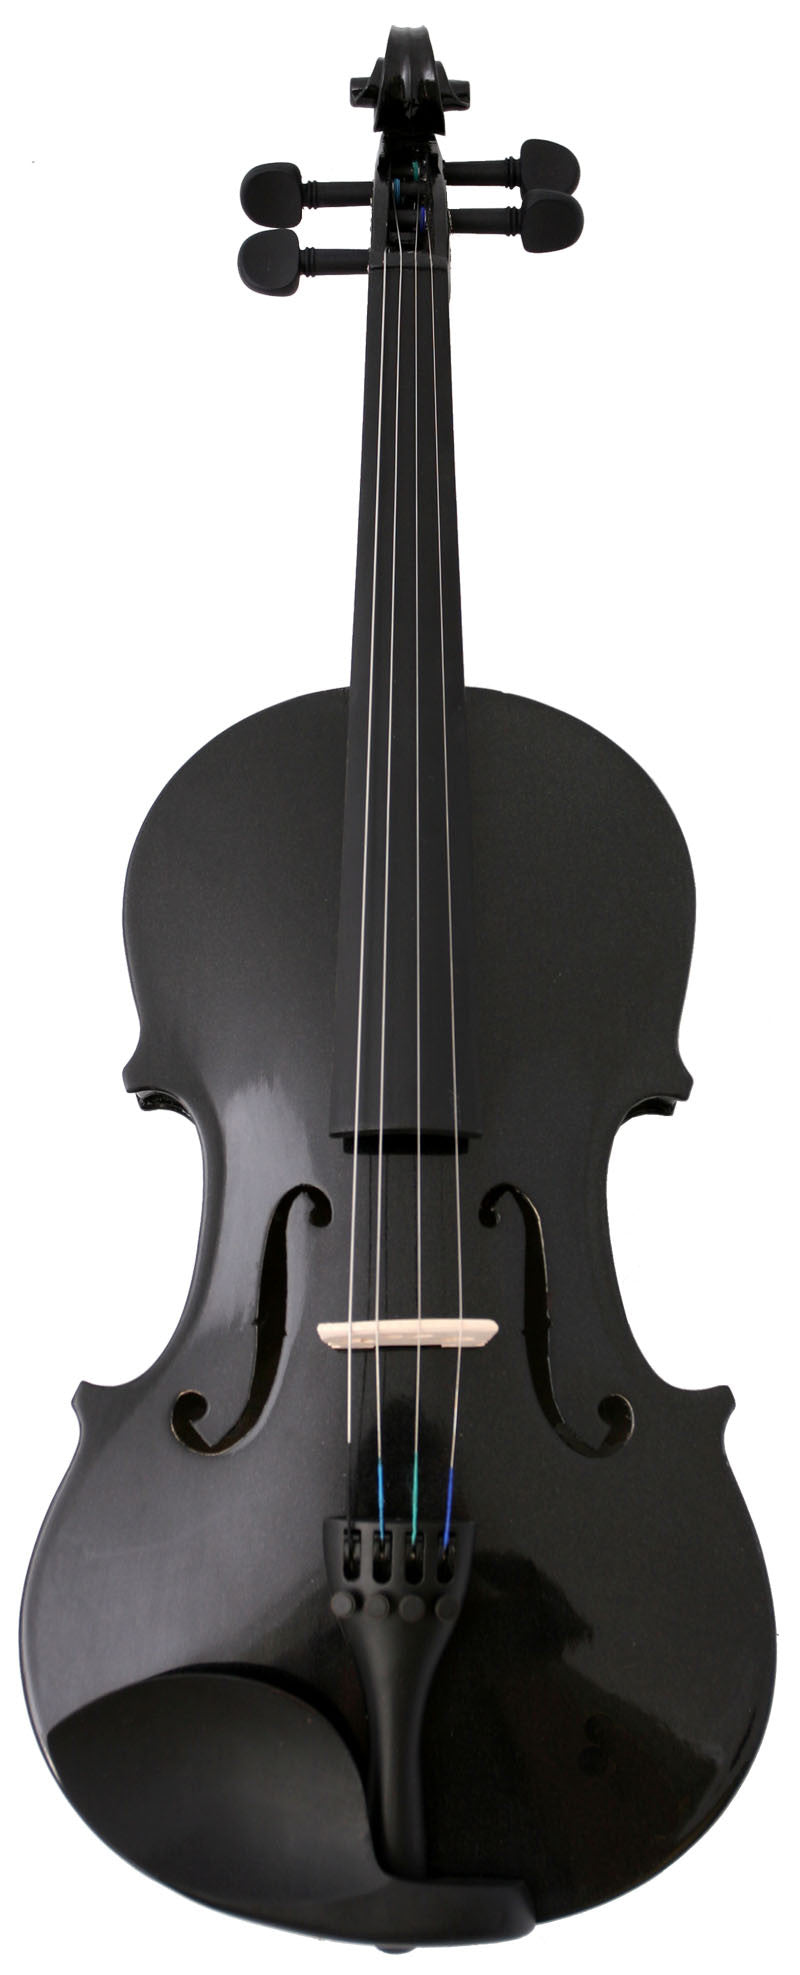 Crescent Direct Vl-bk1/4 1/4 Black Maplewood Acoustic Violin With Case, Rosin, And Bow